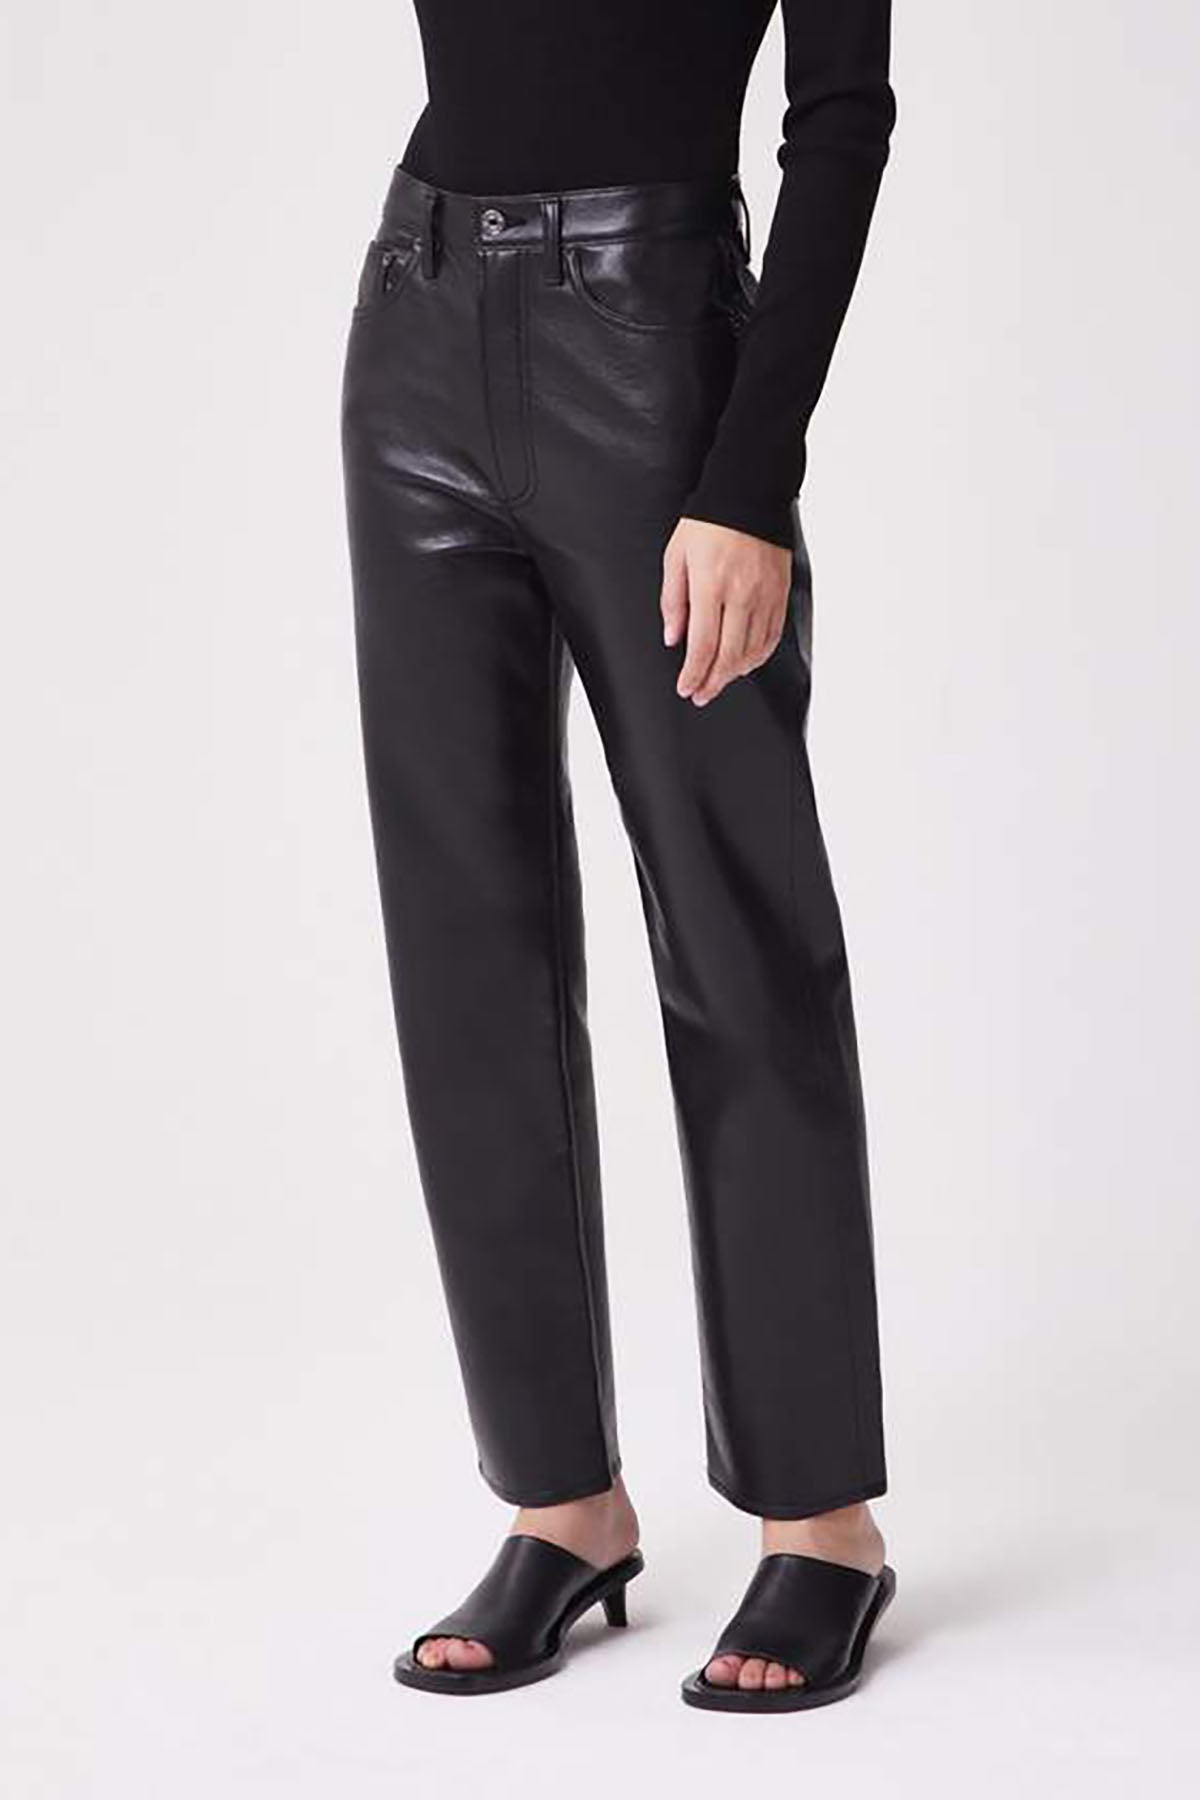 Agolde Recycled Leather 90's Pinch Waist Pants